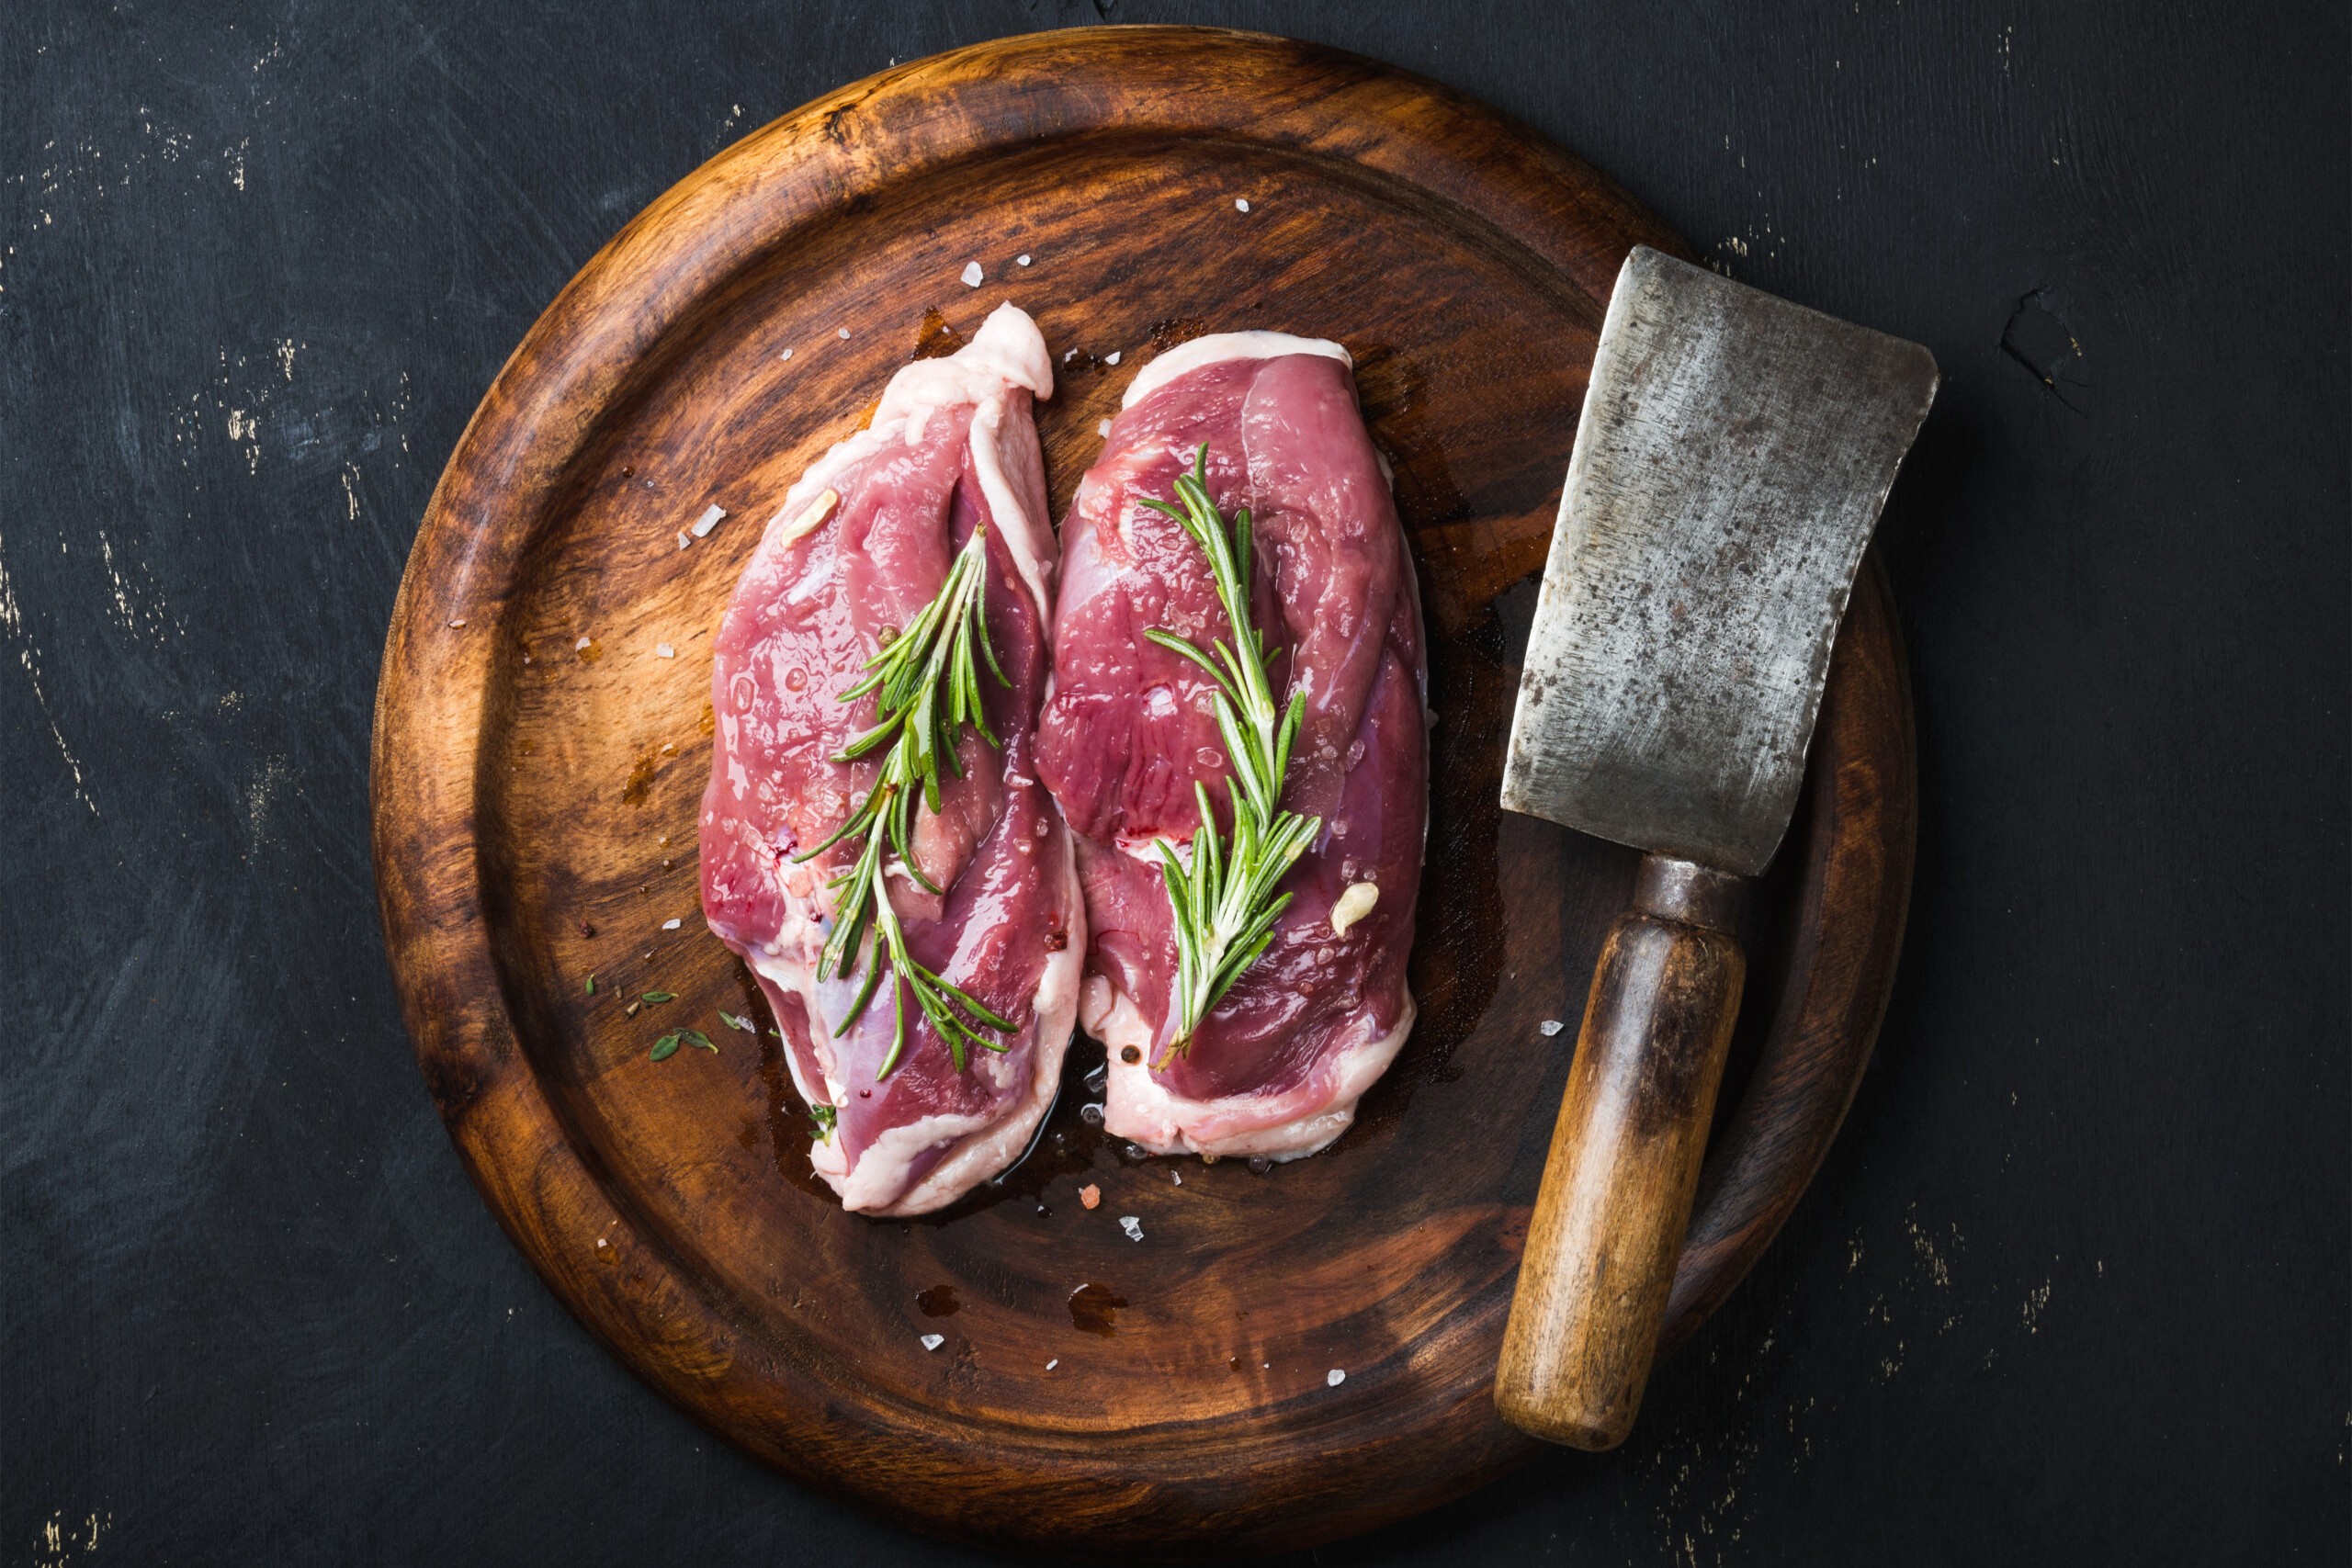 raw-duck-breast-with-rosemary-and-cleaver-on-woode-2021-08-26-16-17-38-utc-scaled_small